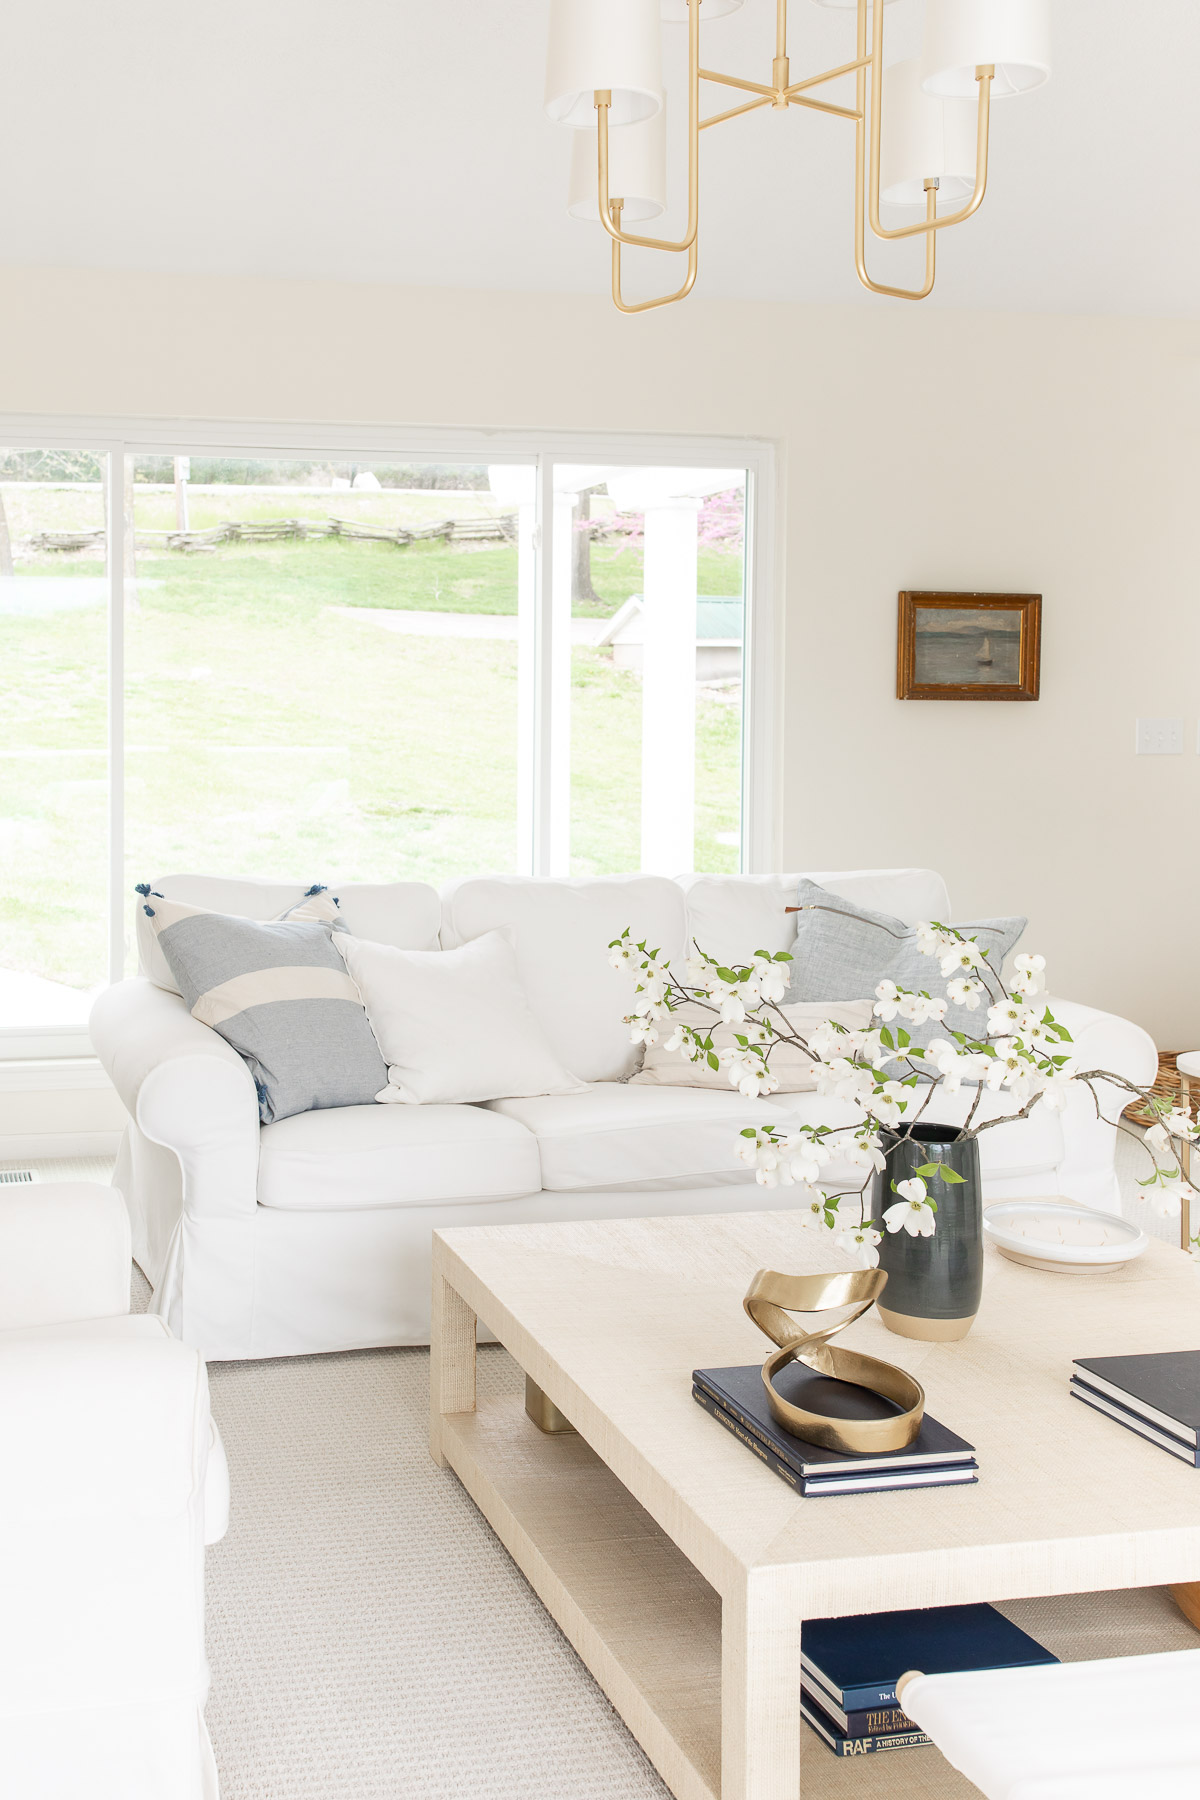 A white couch in a living room, with Farrow and Ball White Tie paint color on the walls. 